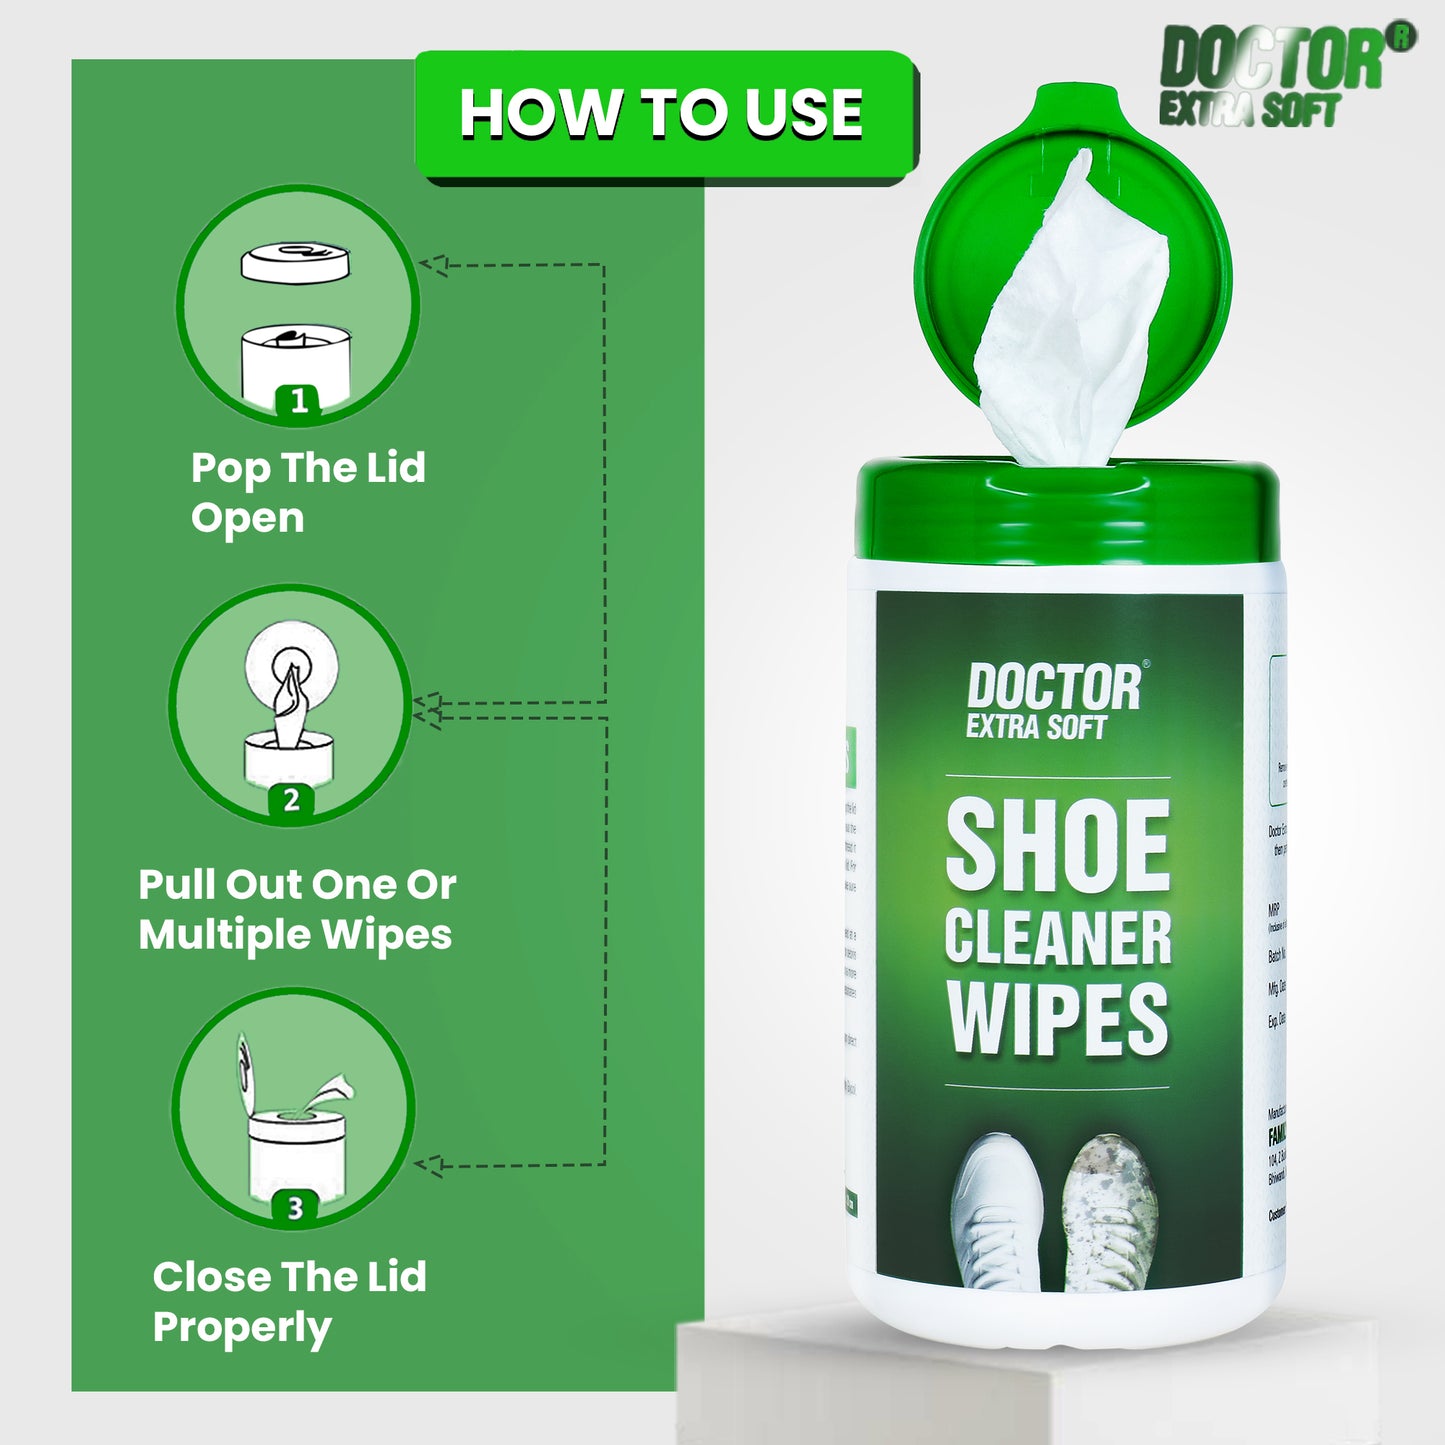 Doctor Extra Soft D-921 Shoe Cleaner Wet Wipes For Shoes/Loafers/Sandals/Slippers/Athletic Shoes/Sneakers/White Shoes/Tennis Shoes/Scrub Off Dirt/Mud/Grass Stains - 50 Wipes (Ready to Use)